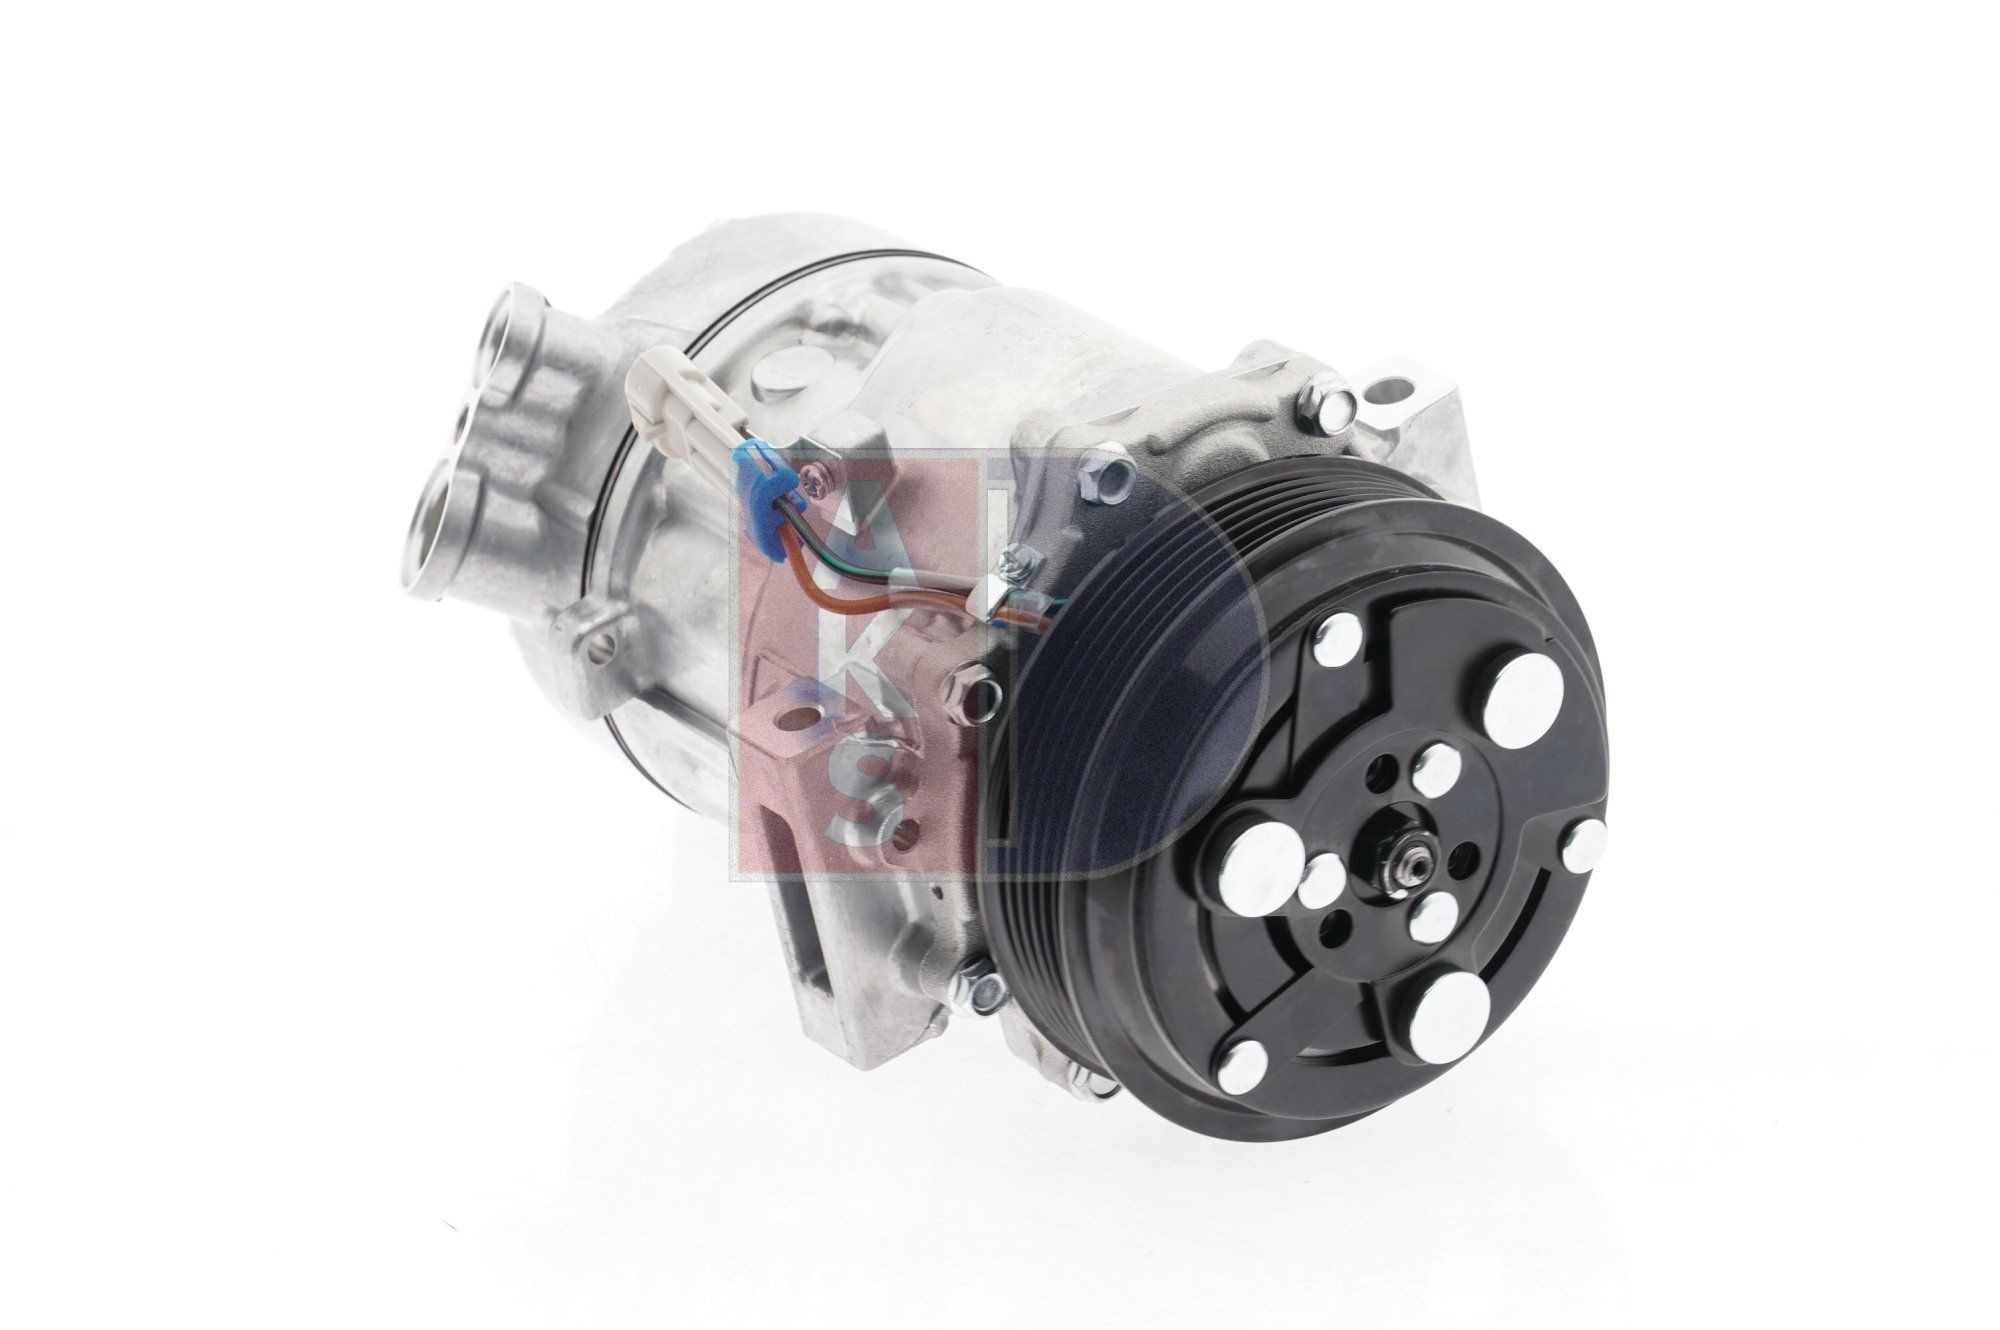 Air conditioning compressor 851599N from AKS DASIS